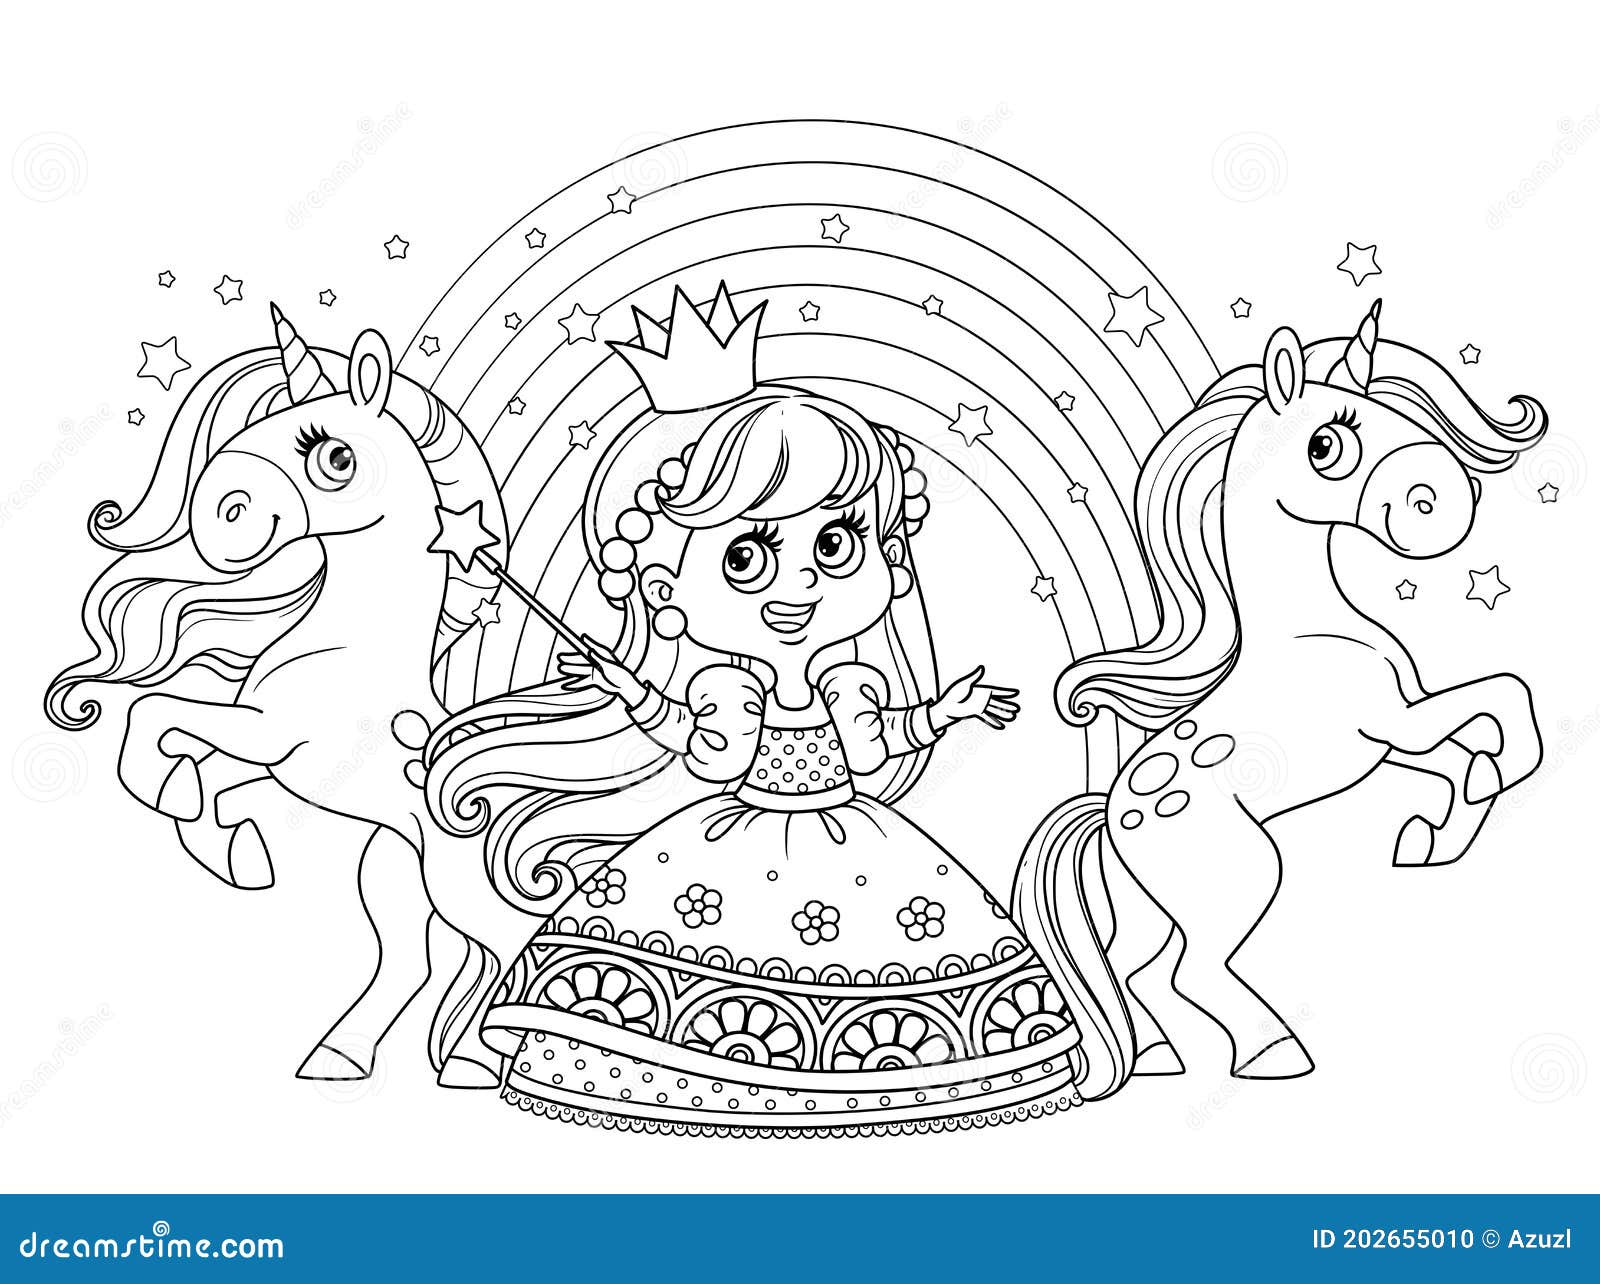 Princess in Ball Dress with Unicorns and Rainbow Outlined for ...